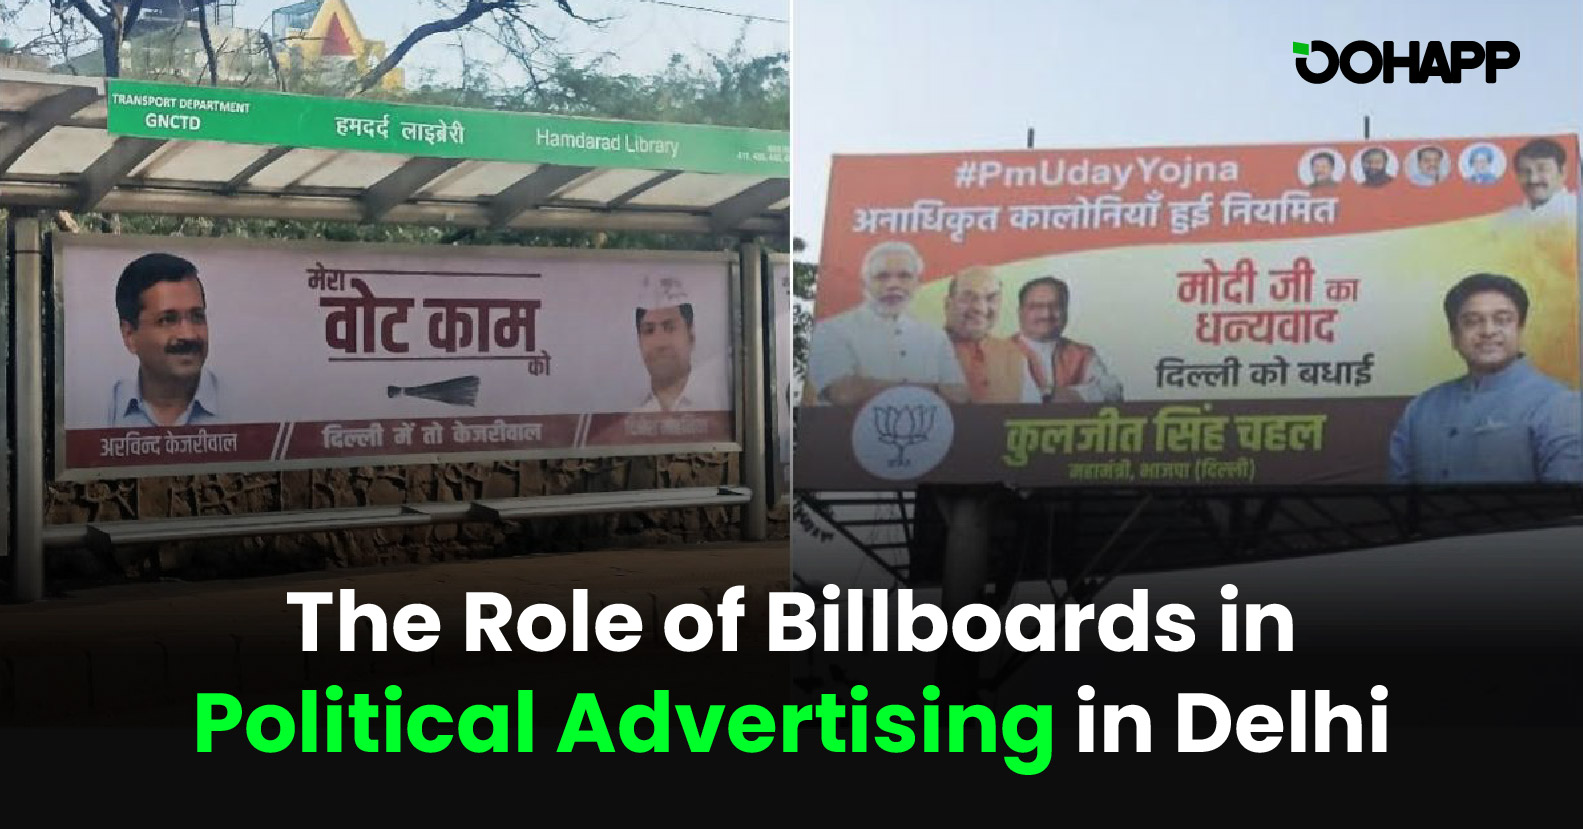 The Role of Billboards in Political Advertising in Delhi